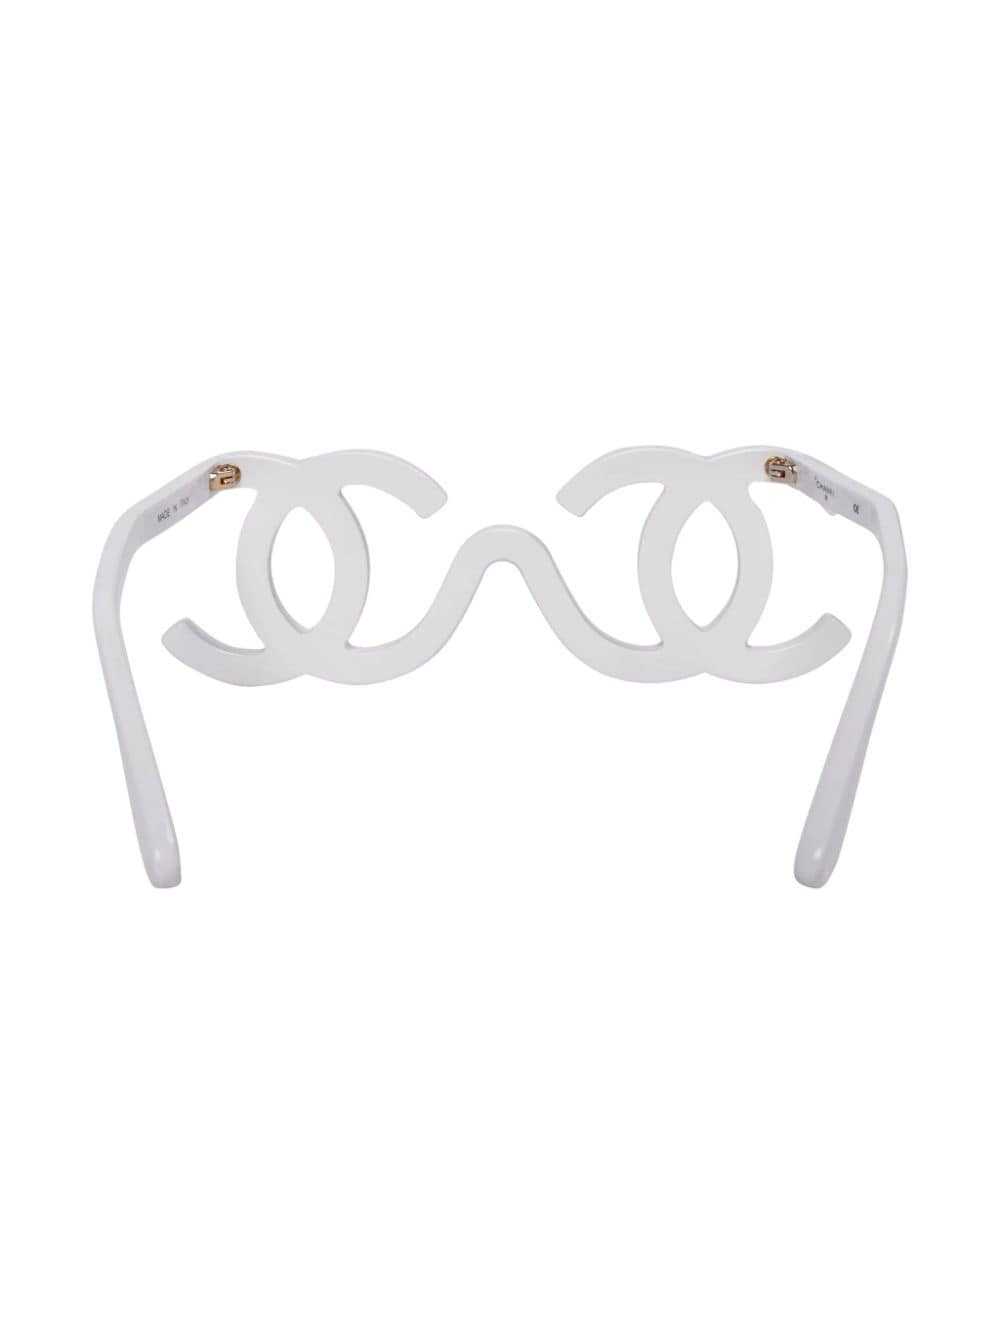 CHANEL Pre-Owned 1994 CC Runway sunglasses - White - image 4